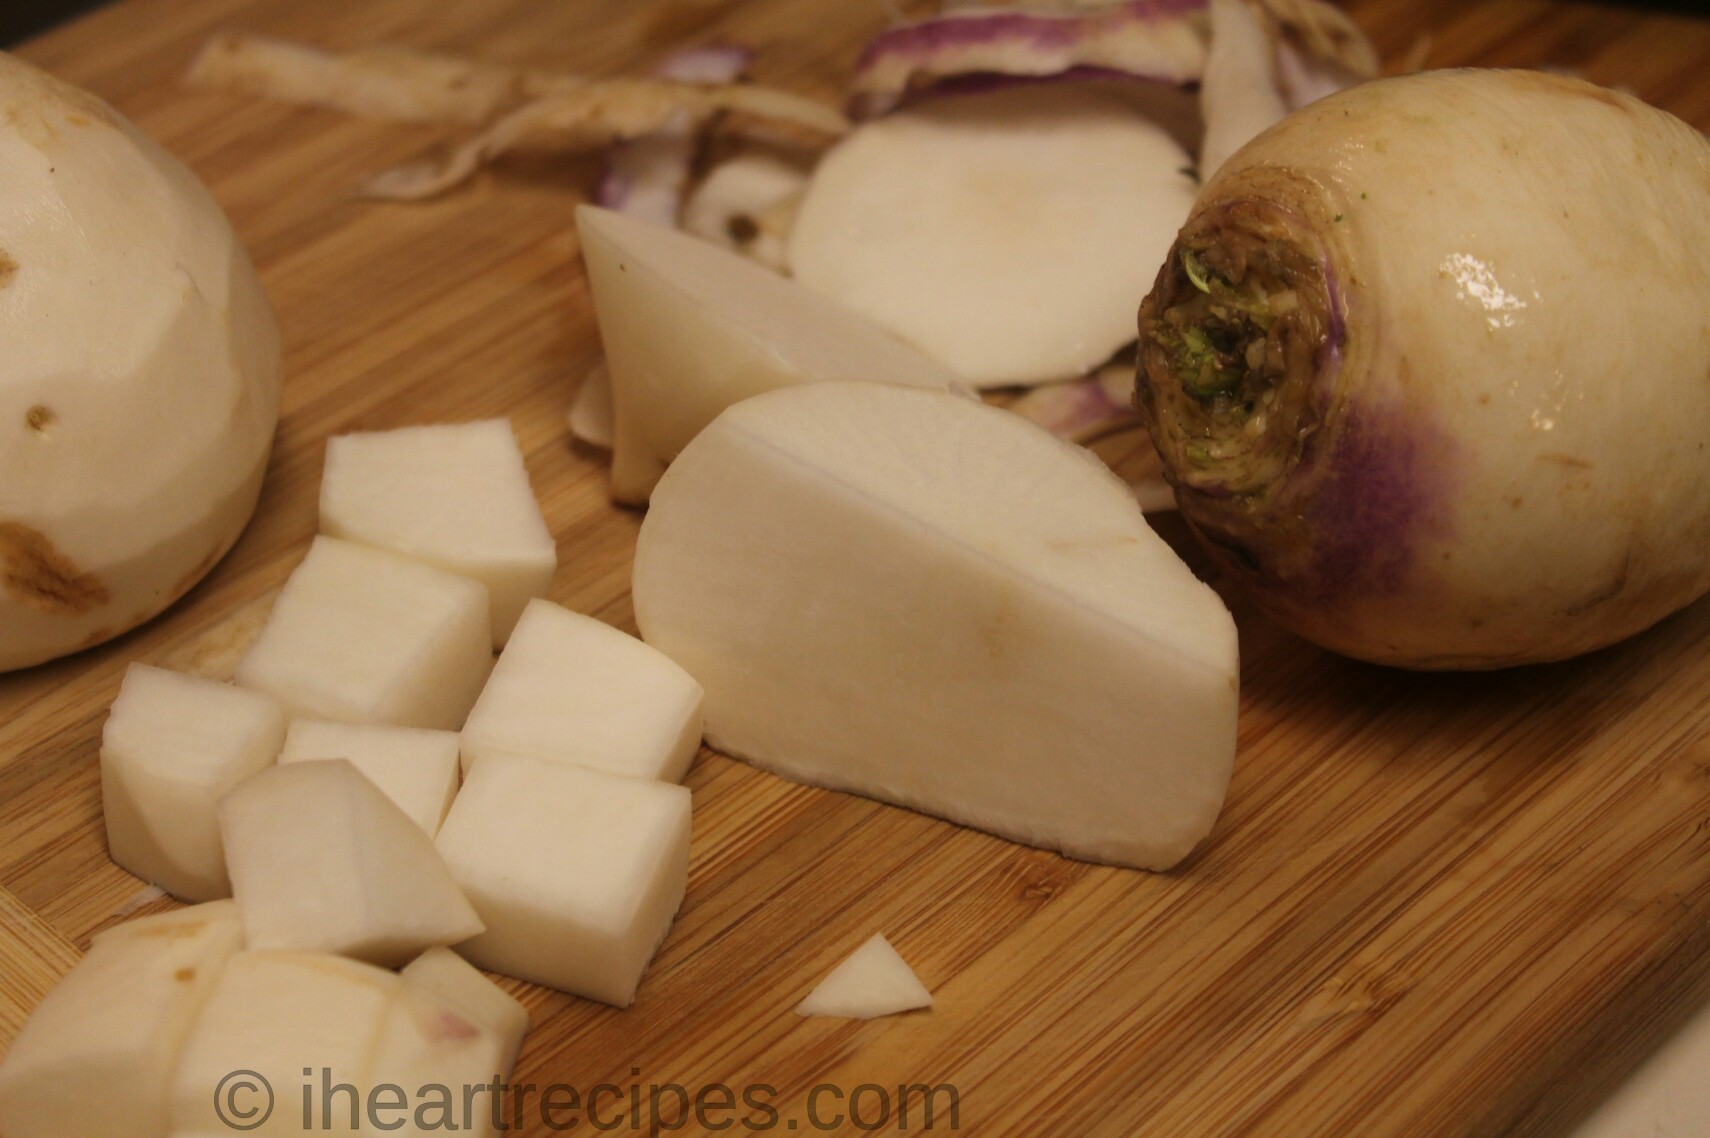 Raw turnips sit on a wooden cutting board. Some are chopped into cubes, some are cut in half, and one whole turnip remains unpeeled.